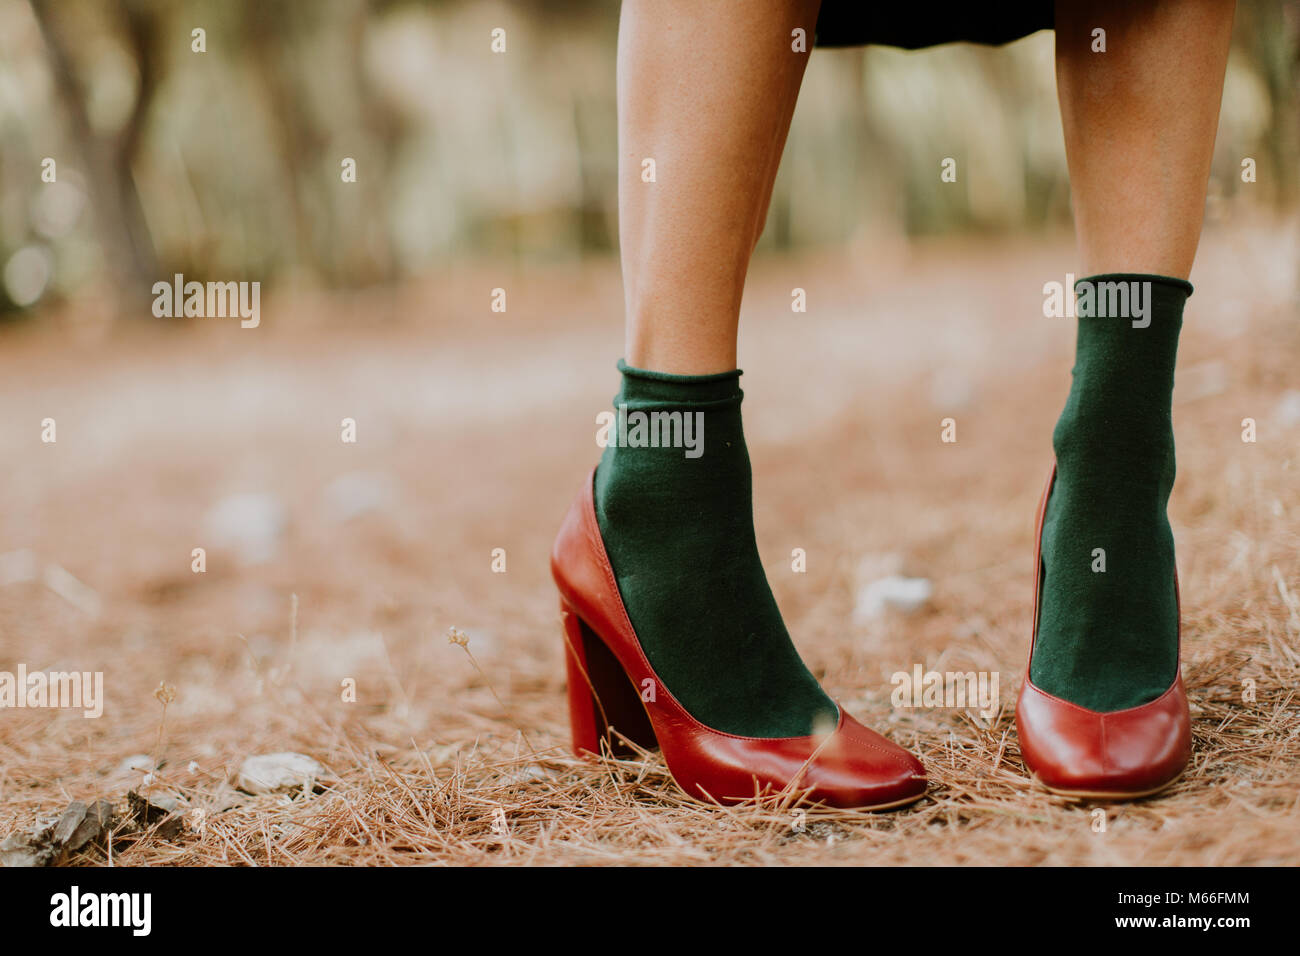 Close-up of a woman's legs wearing ankle socks in high heel shoes Stock  Photo - Alamy